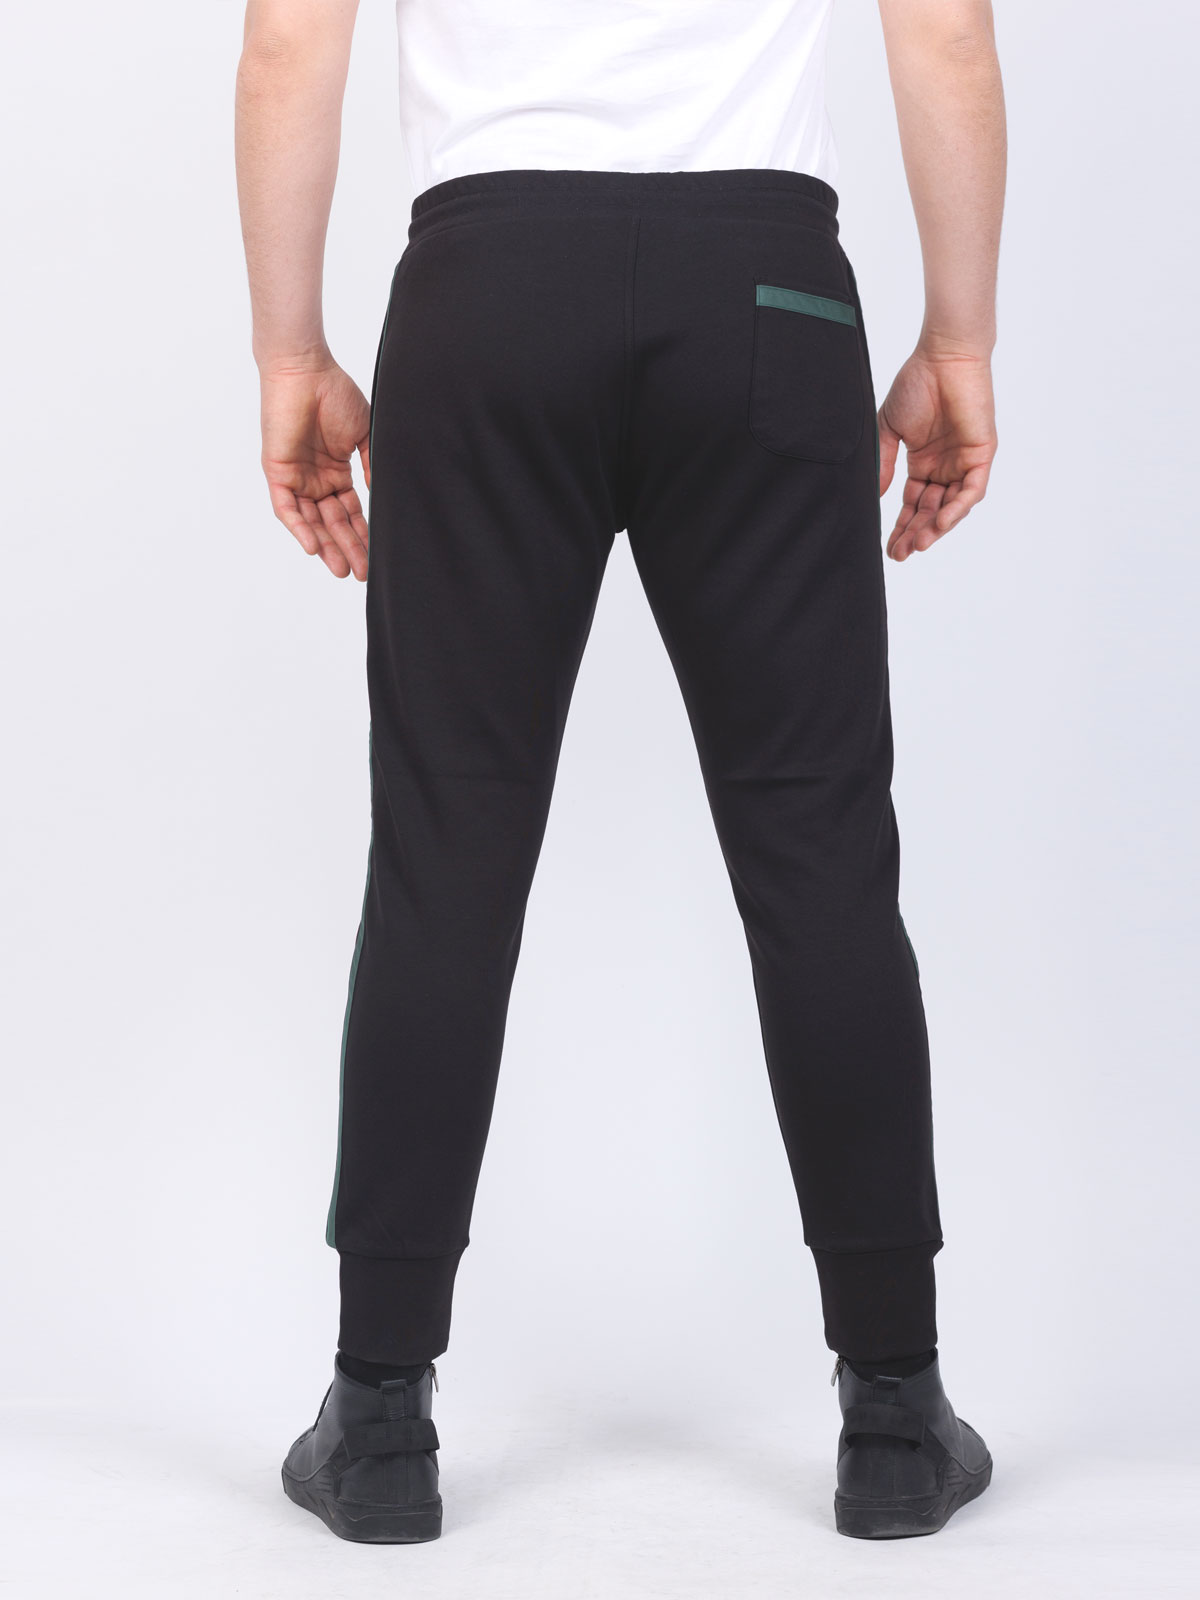 Bottom in black with green stripe - 29003 € 33.18 img2